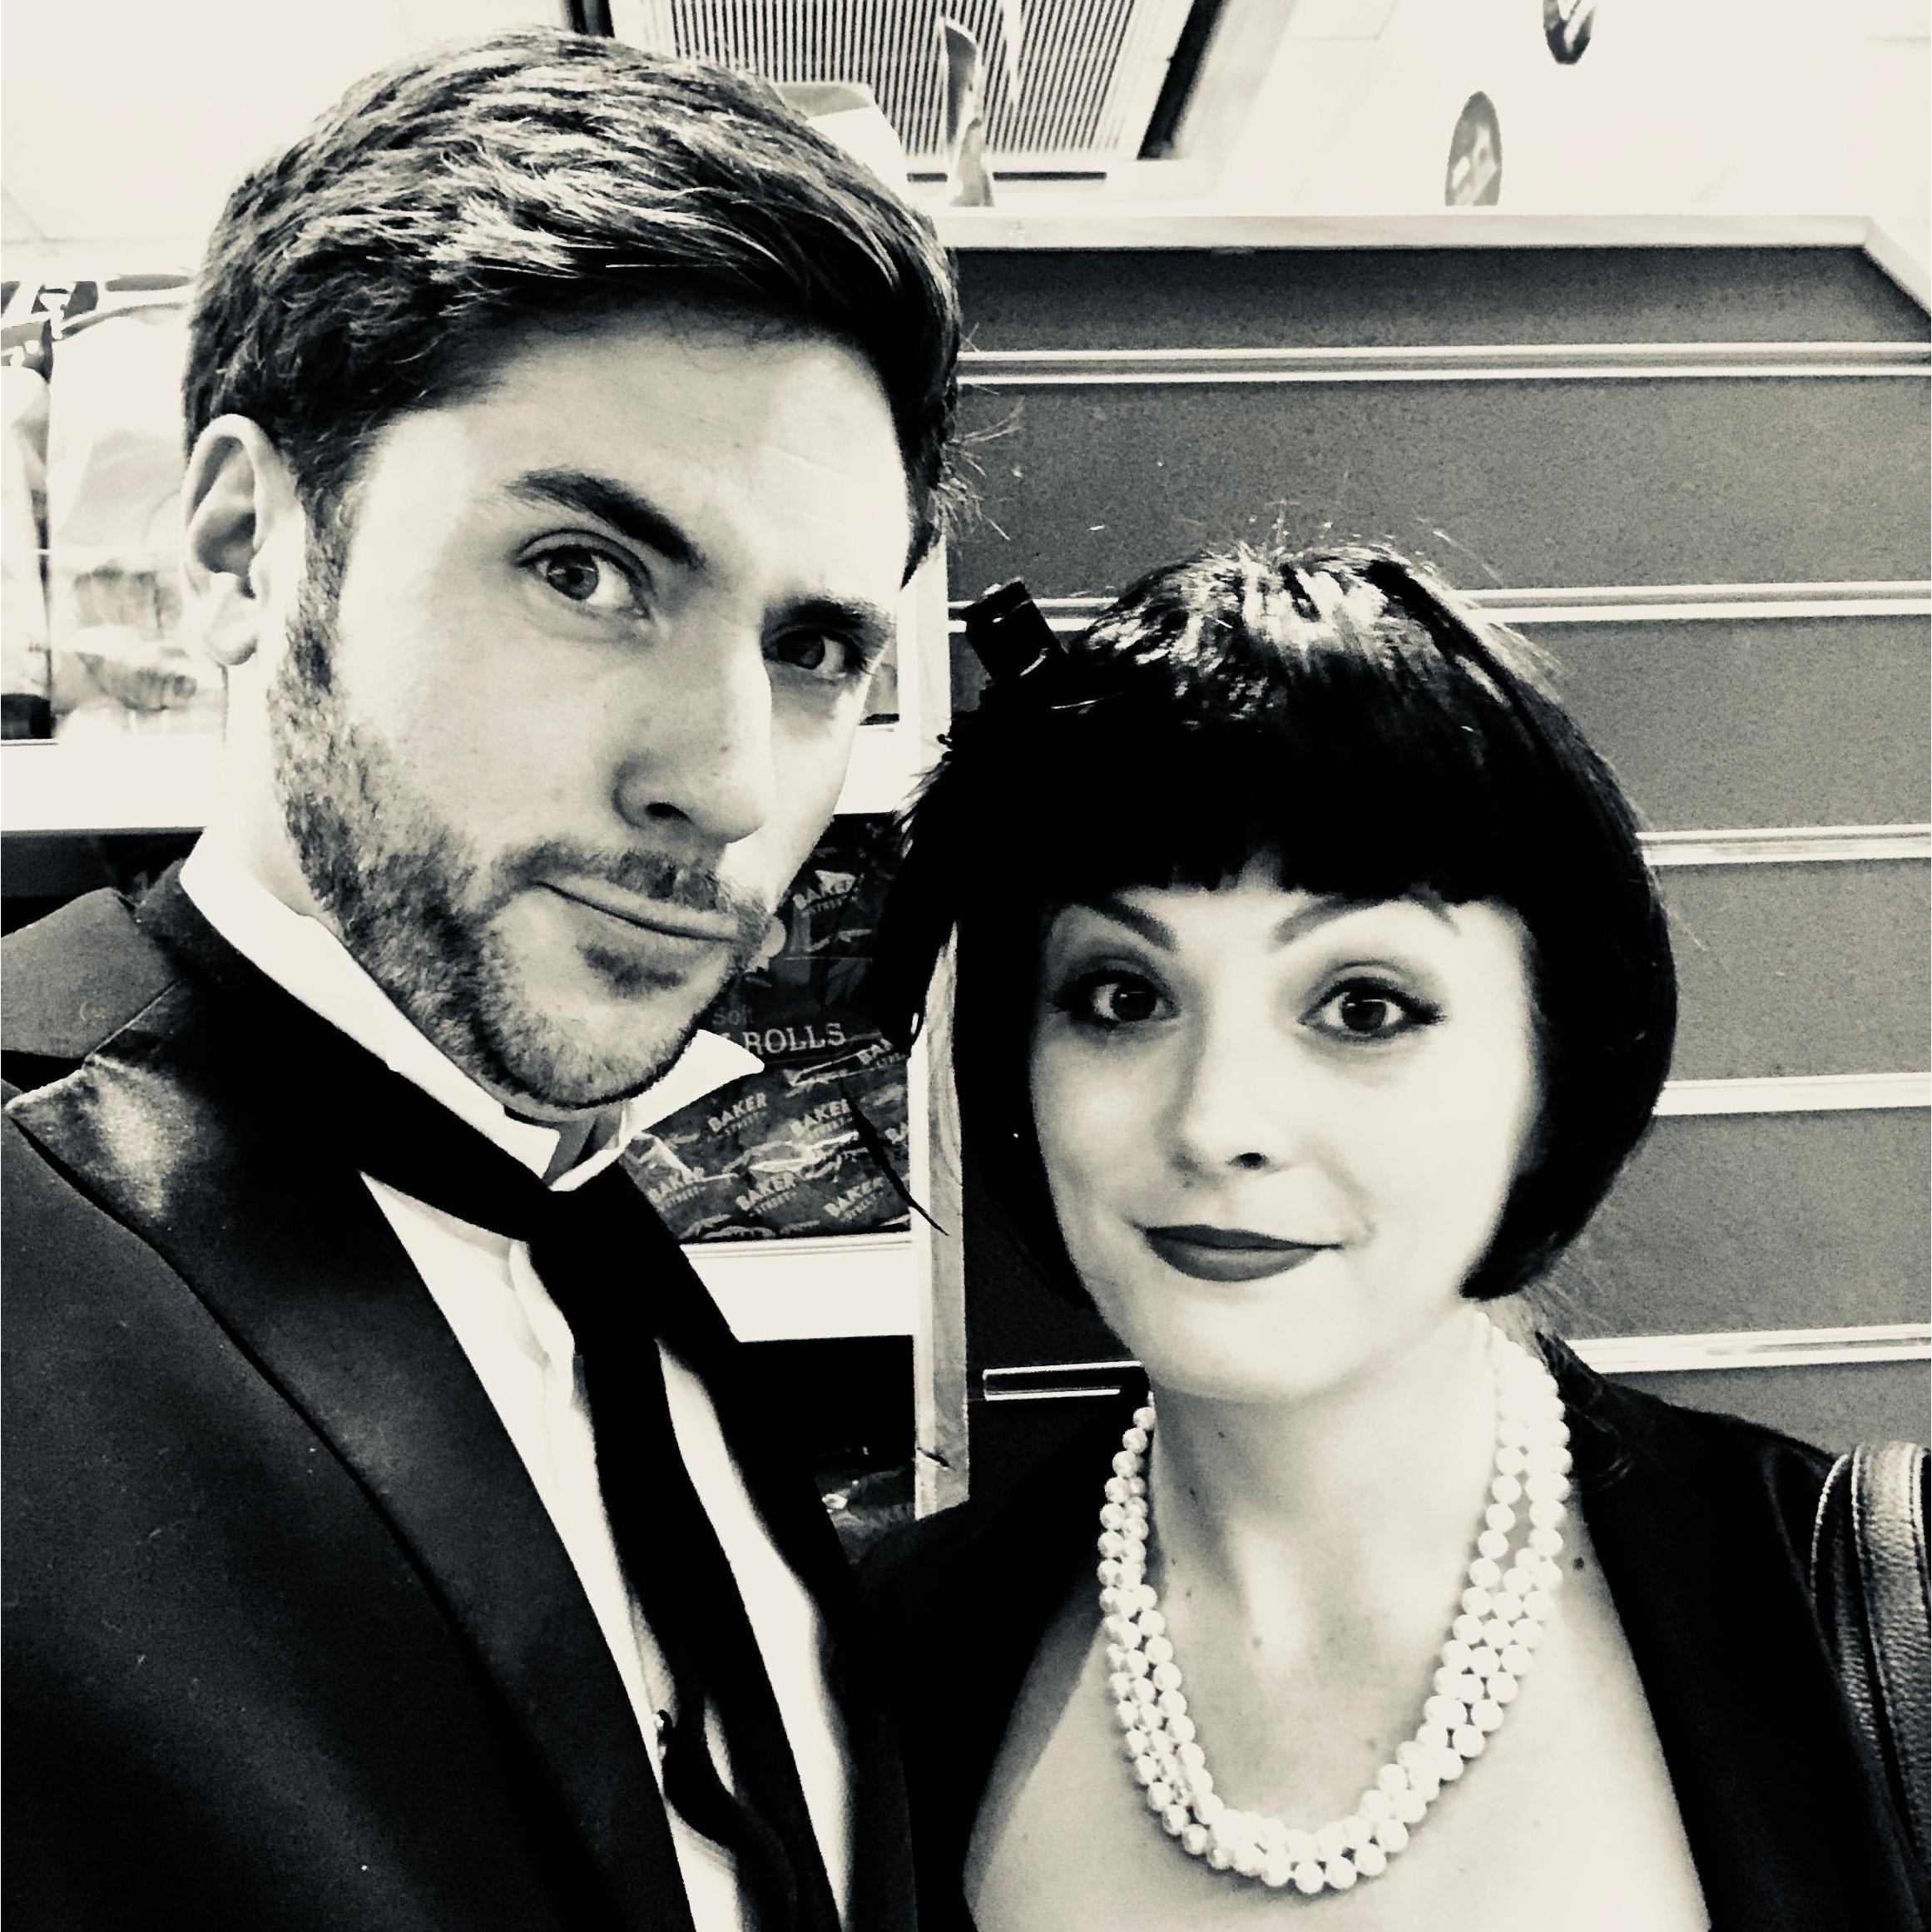 Dressed up as Wadsworth and Mrs. White for a Halloween viewing of Clue in London
2017